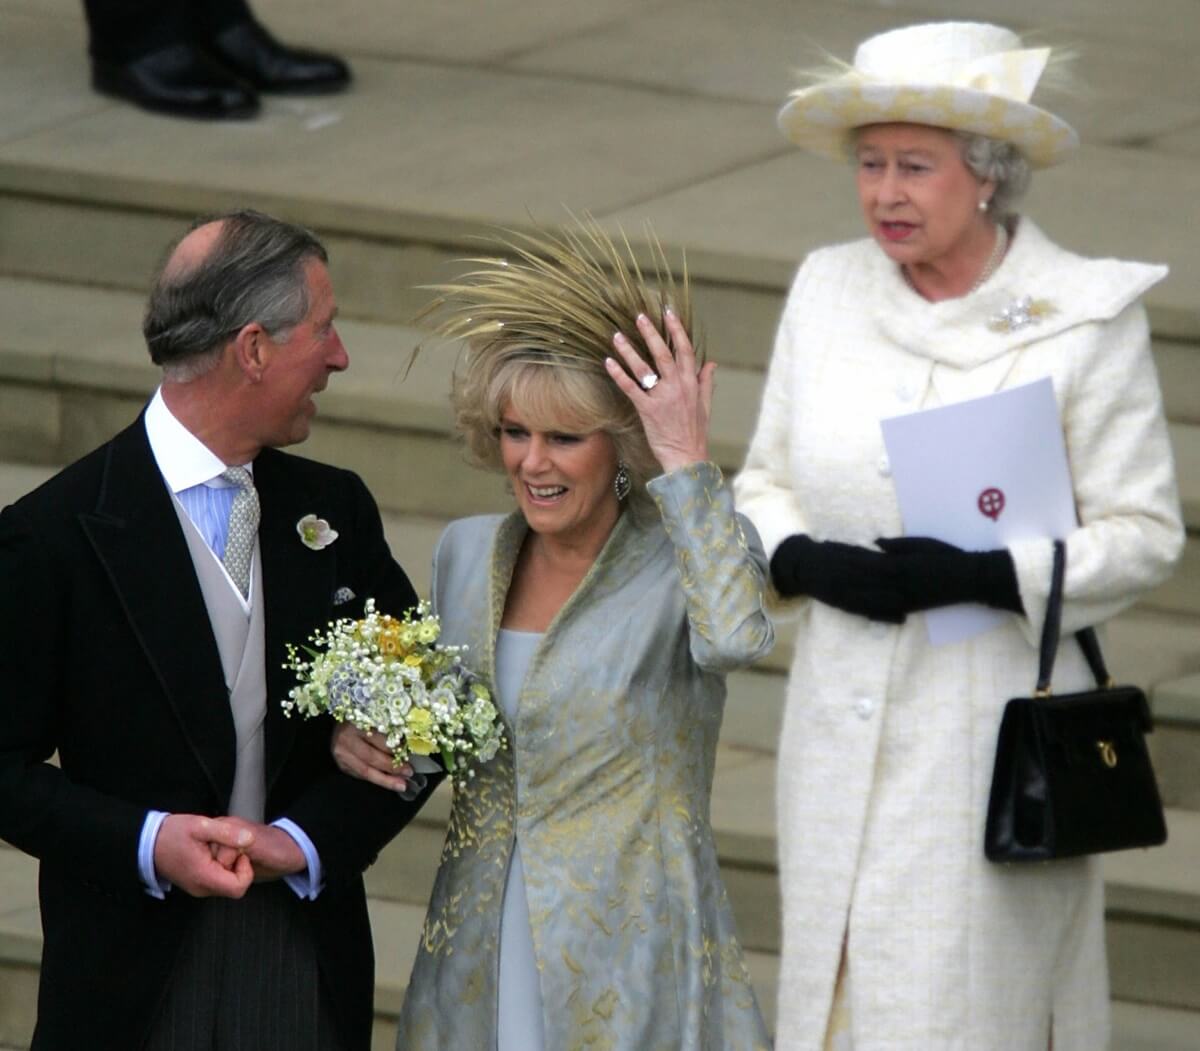 Then-Prince Charles, Camilla Parker Bowles, and Queen Elizabeth II, leave the Service of Prayer and Dedication